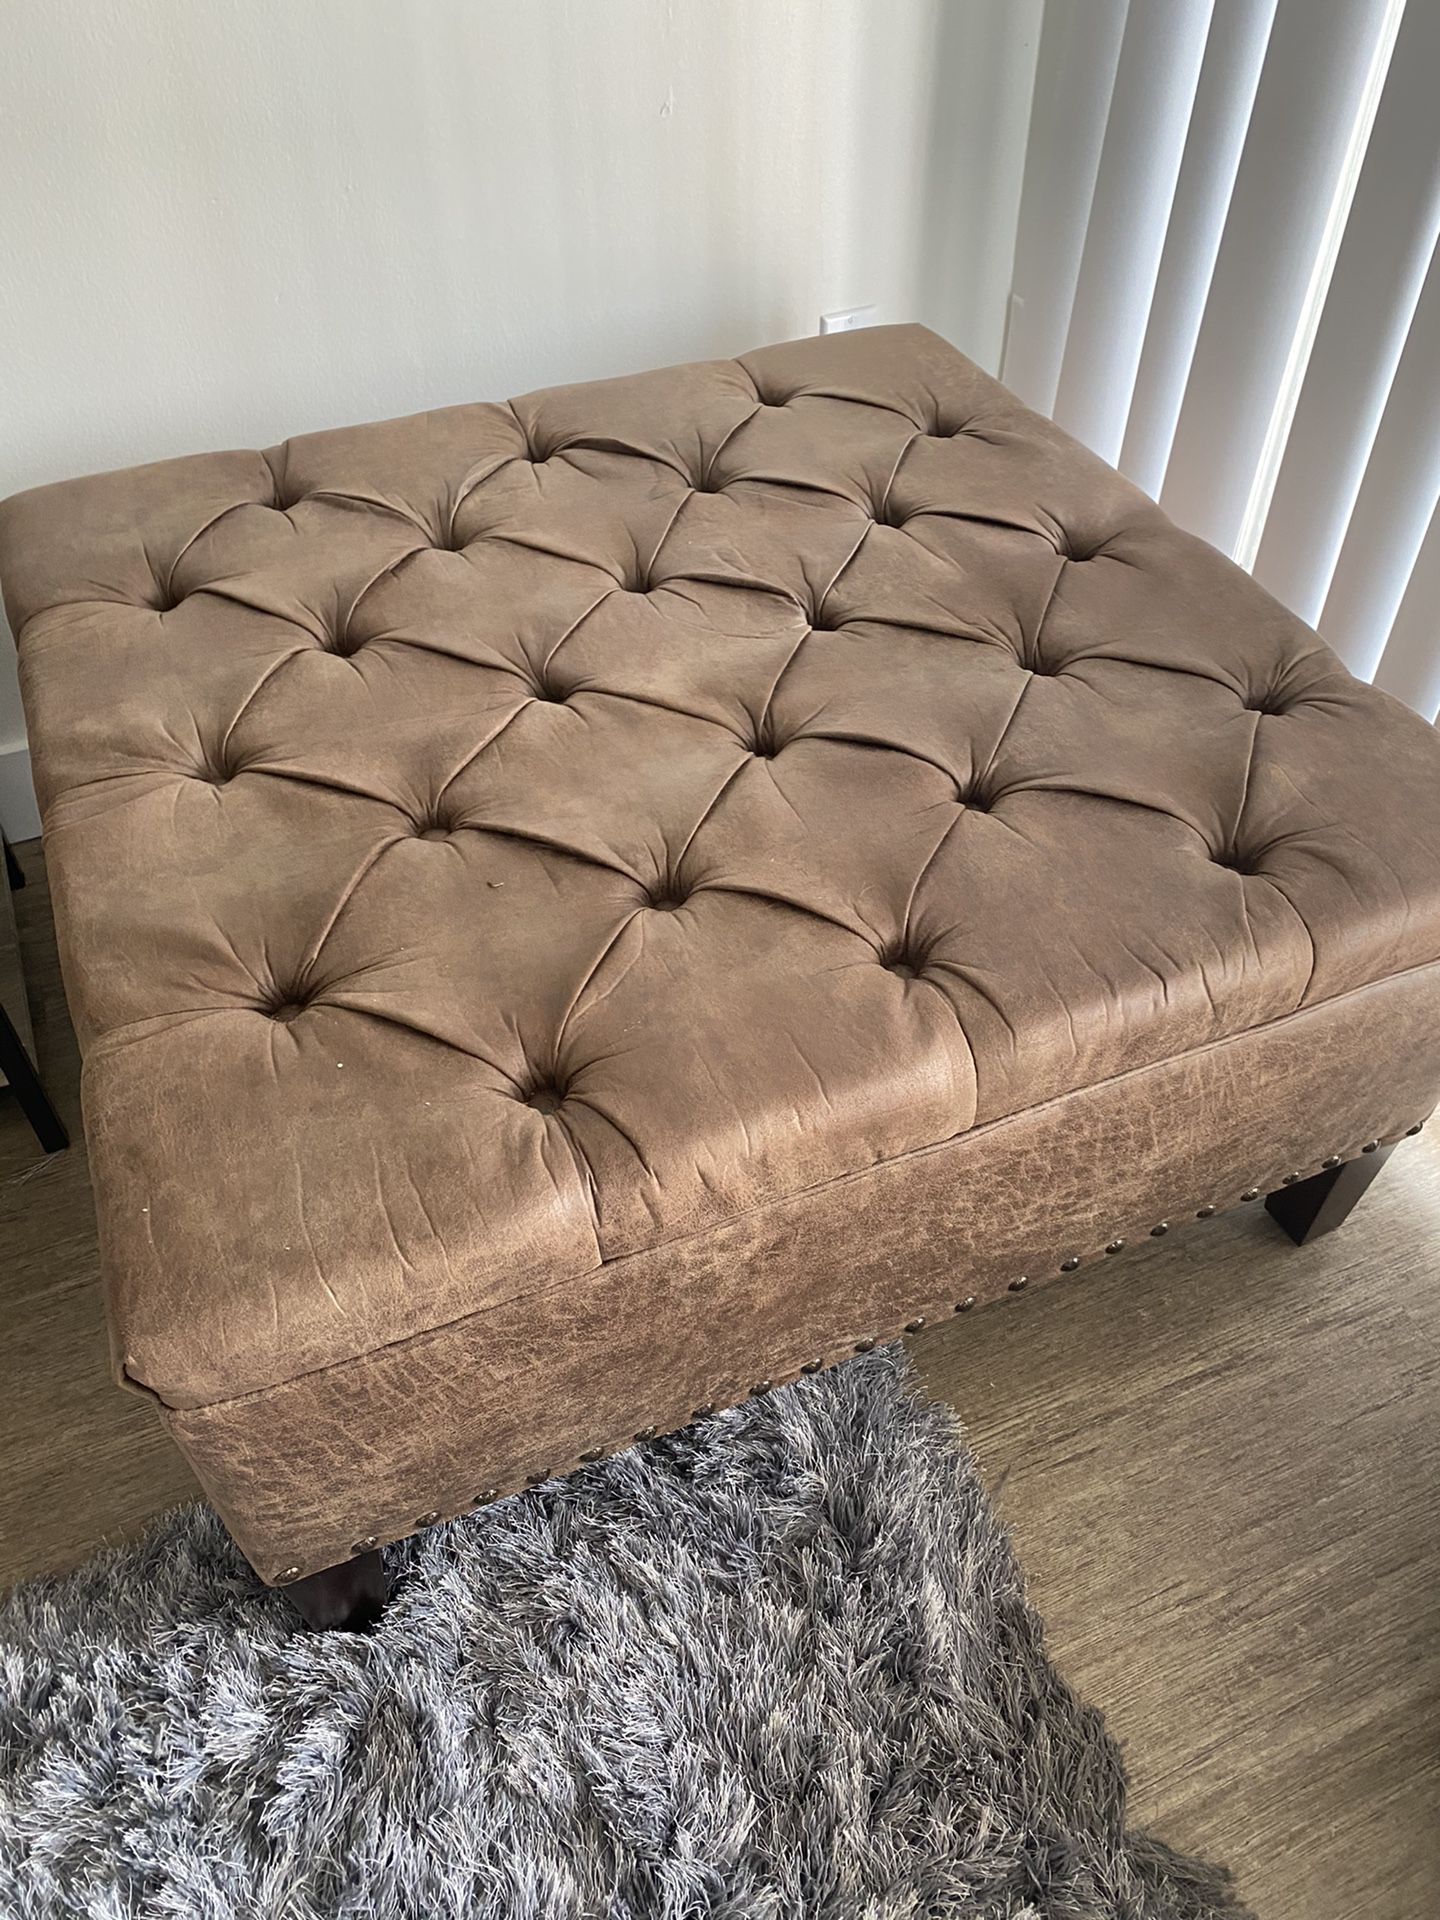 Ottoman! Tufted like new! Barely used